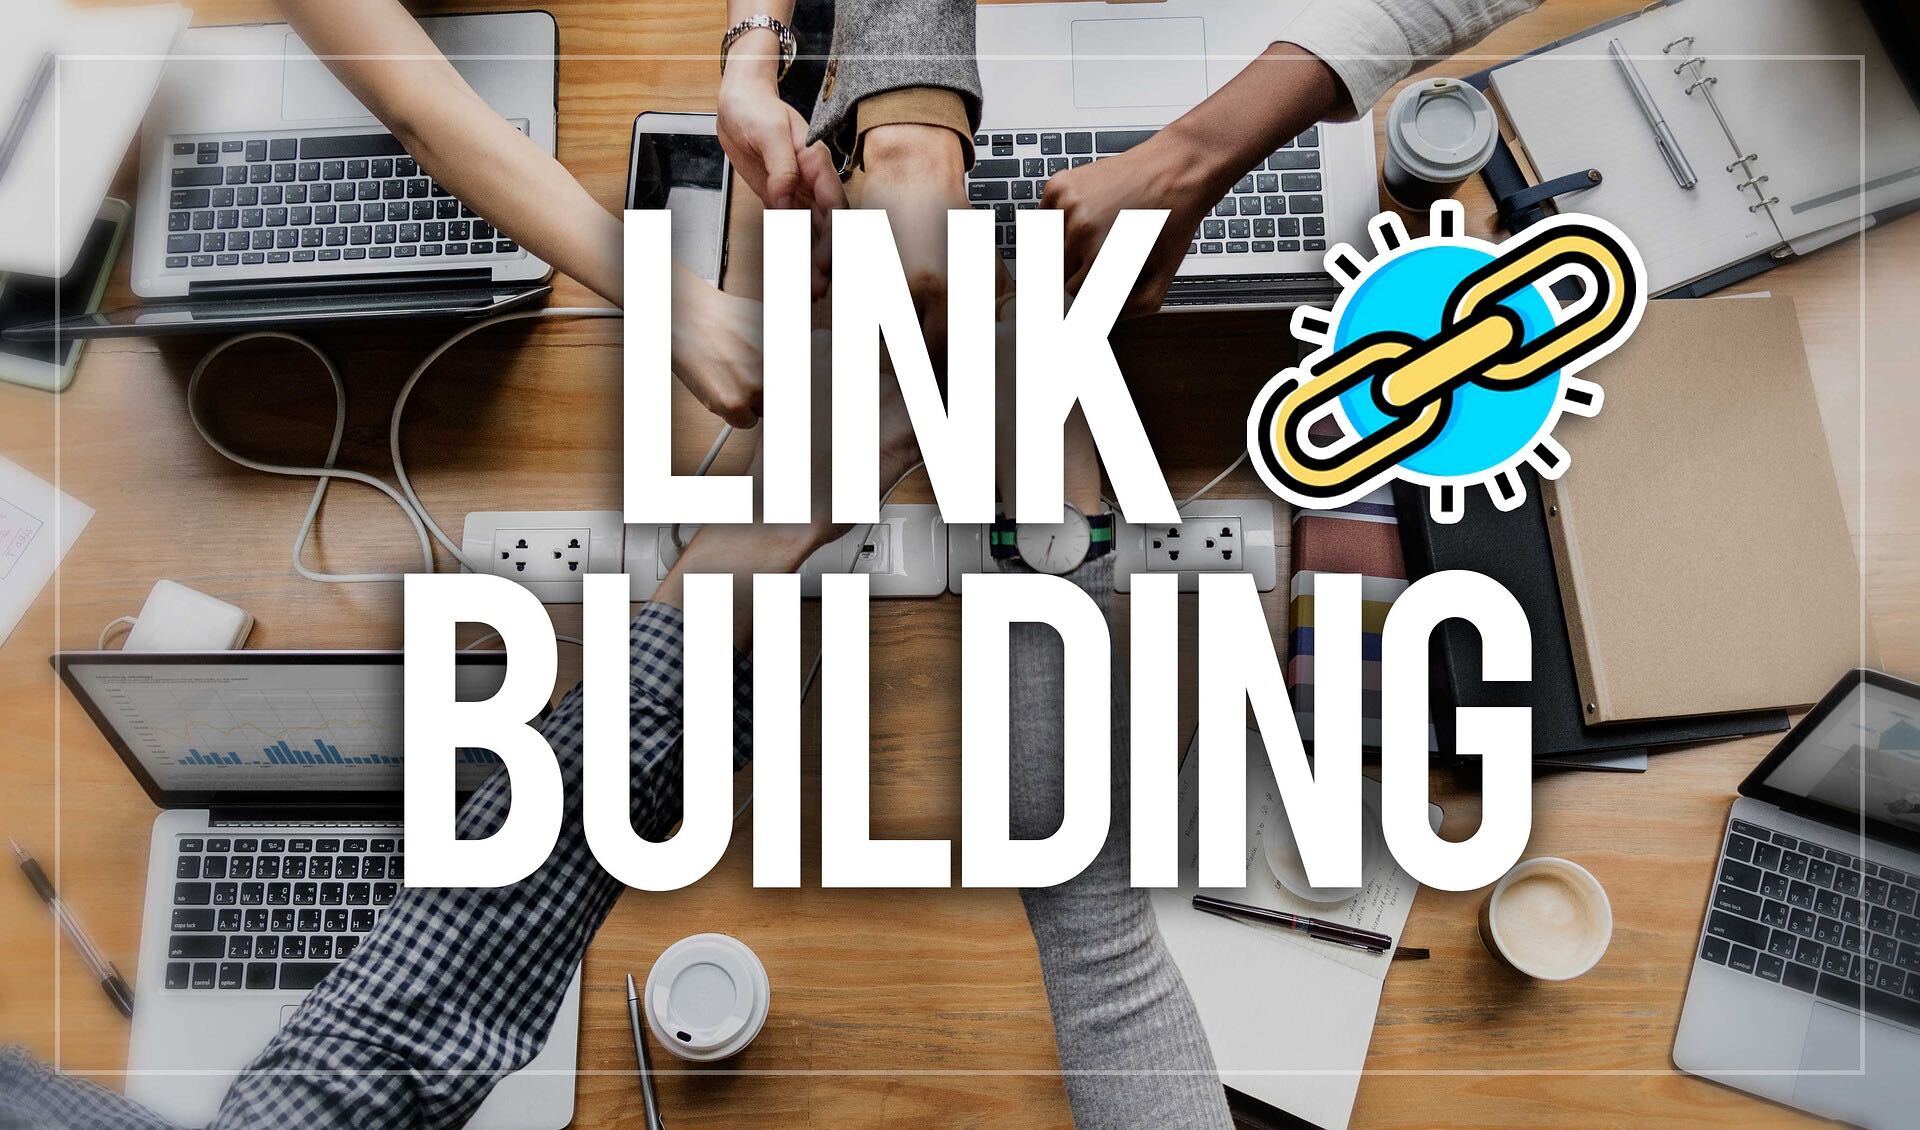 Link building and developing a link-building strategy